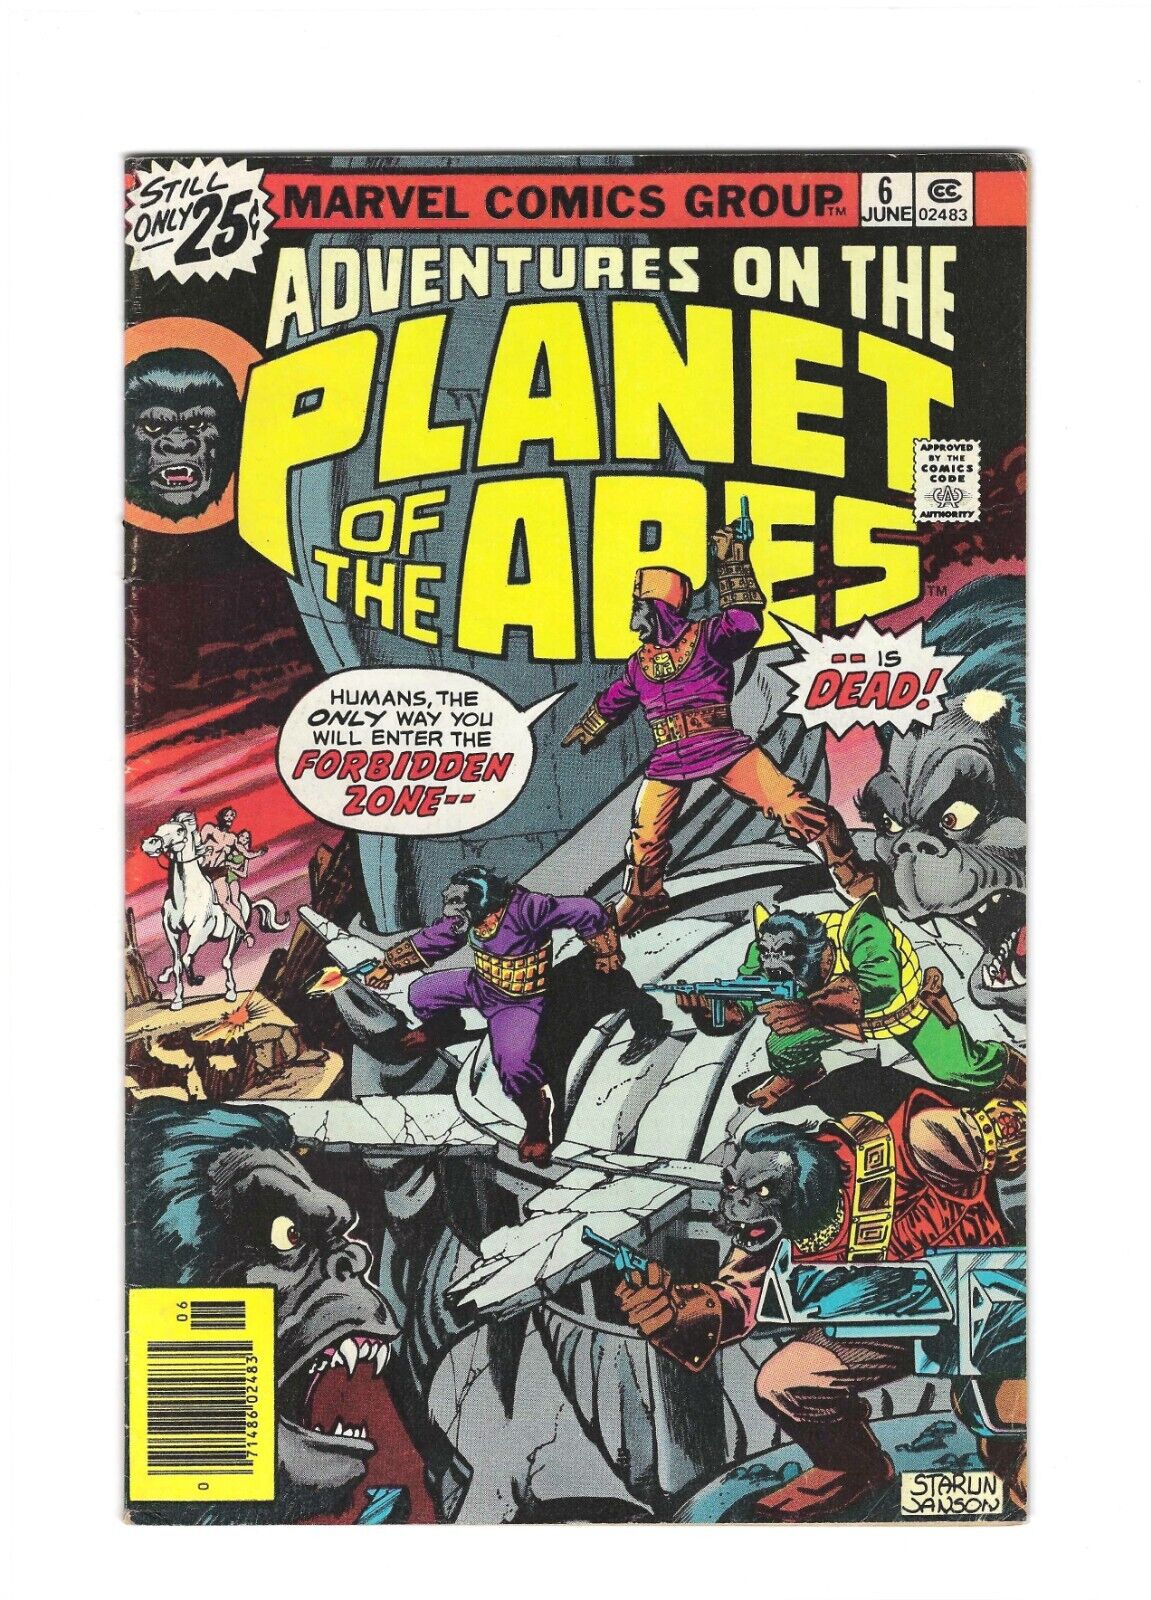 Adventures on the Planet of the Apes #6:Cleaned:Pressed:Bagged:Boarded FN-VF 7